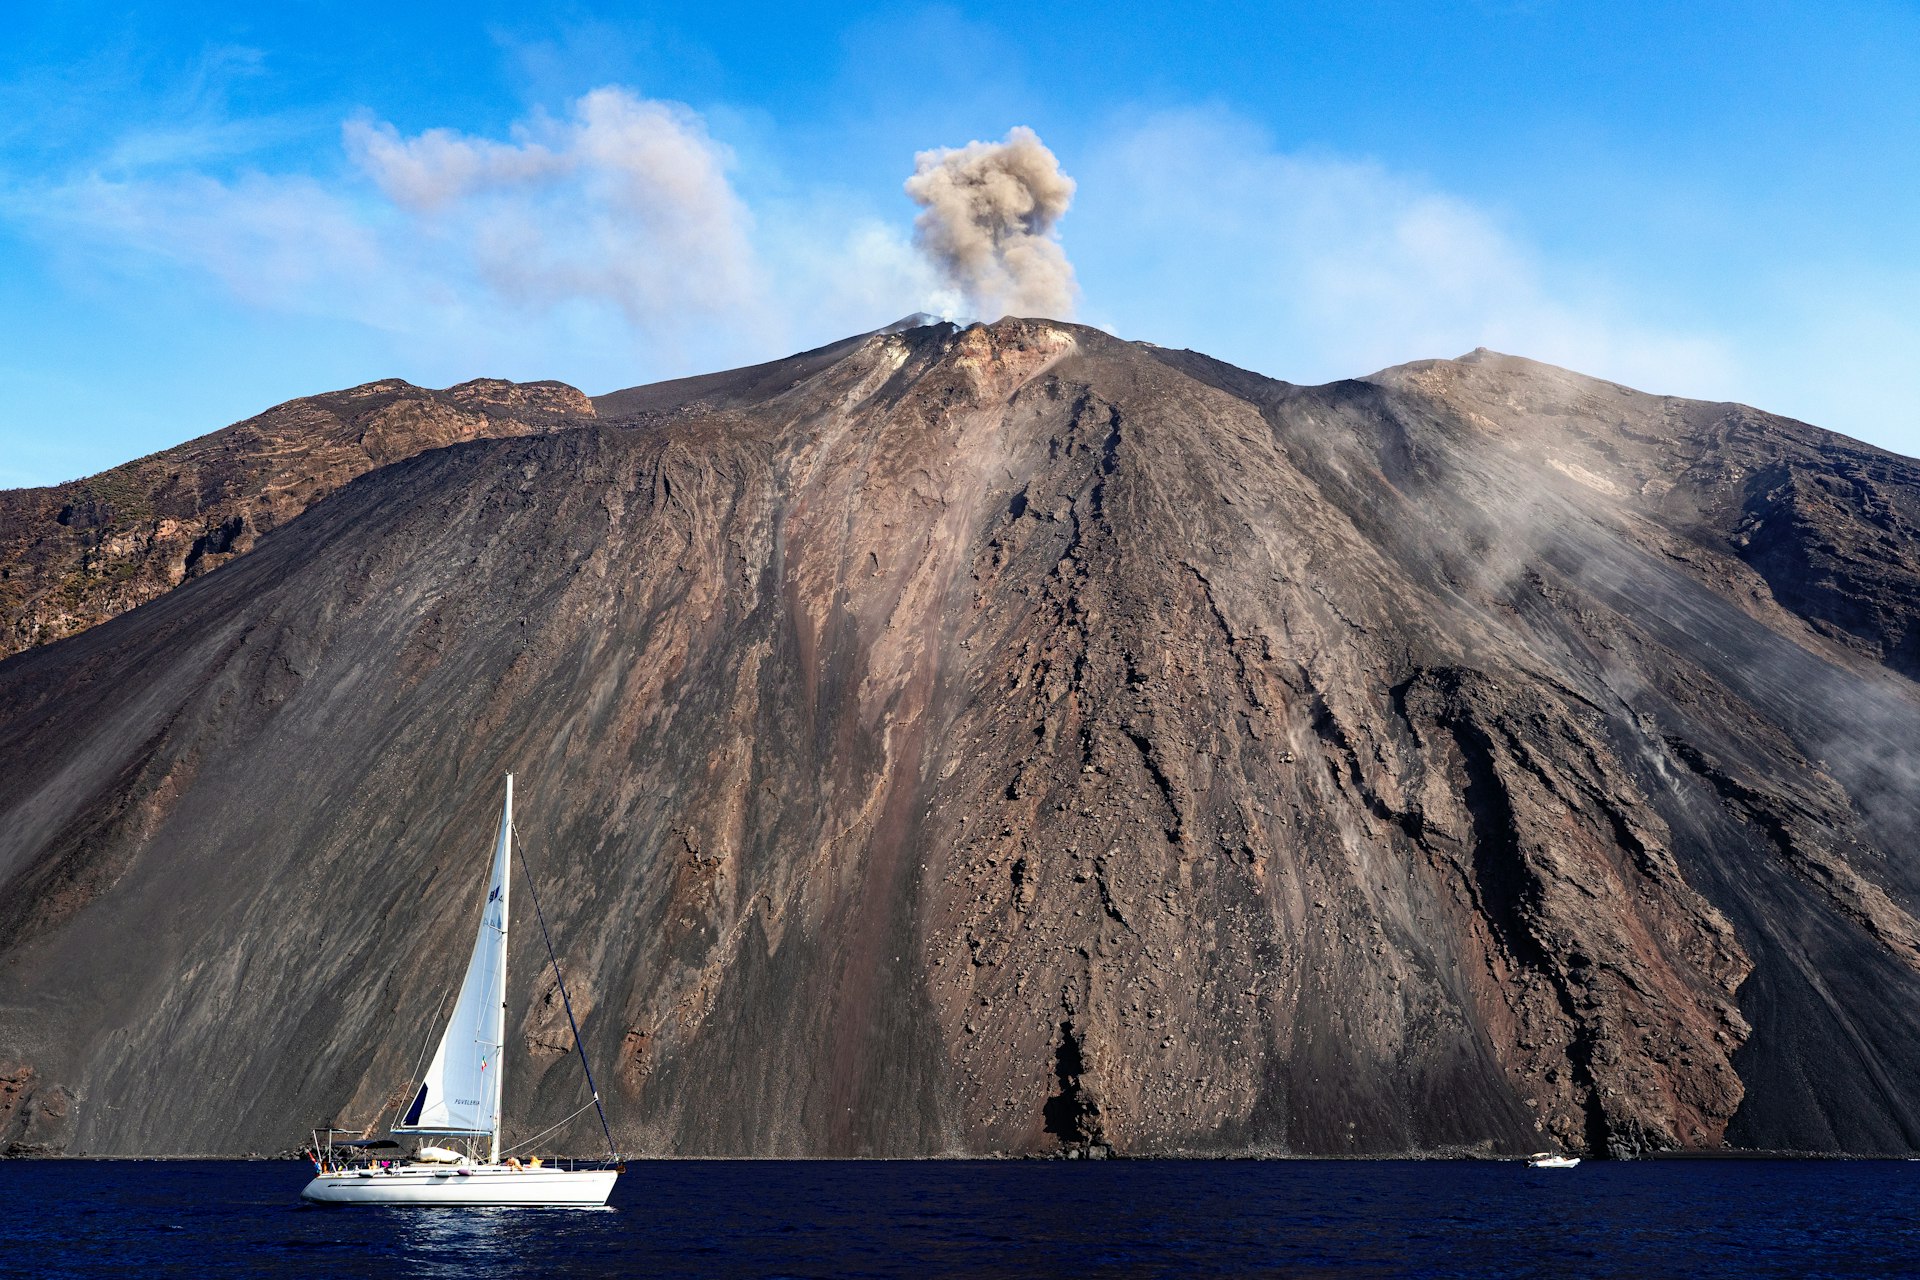 A sailboat passes by an eruption on Stromboli, Aeolian Islands, Italy